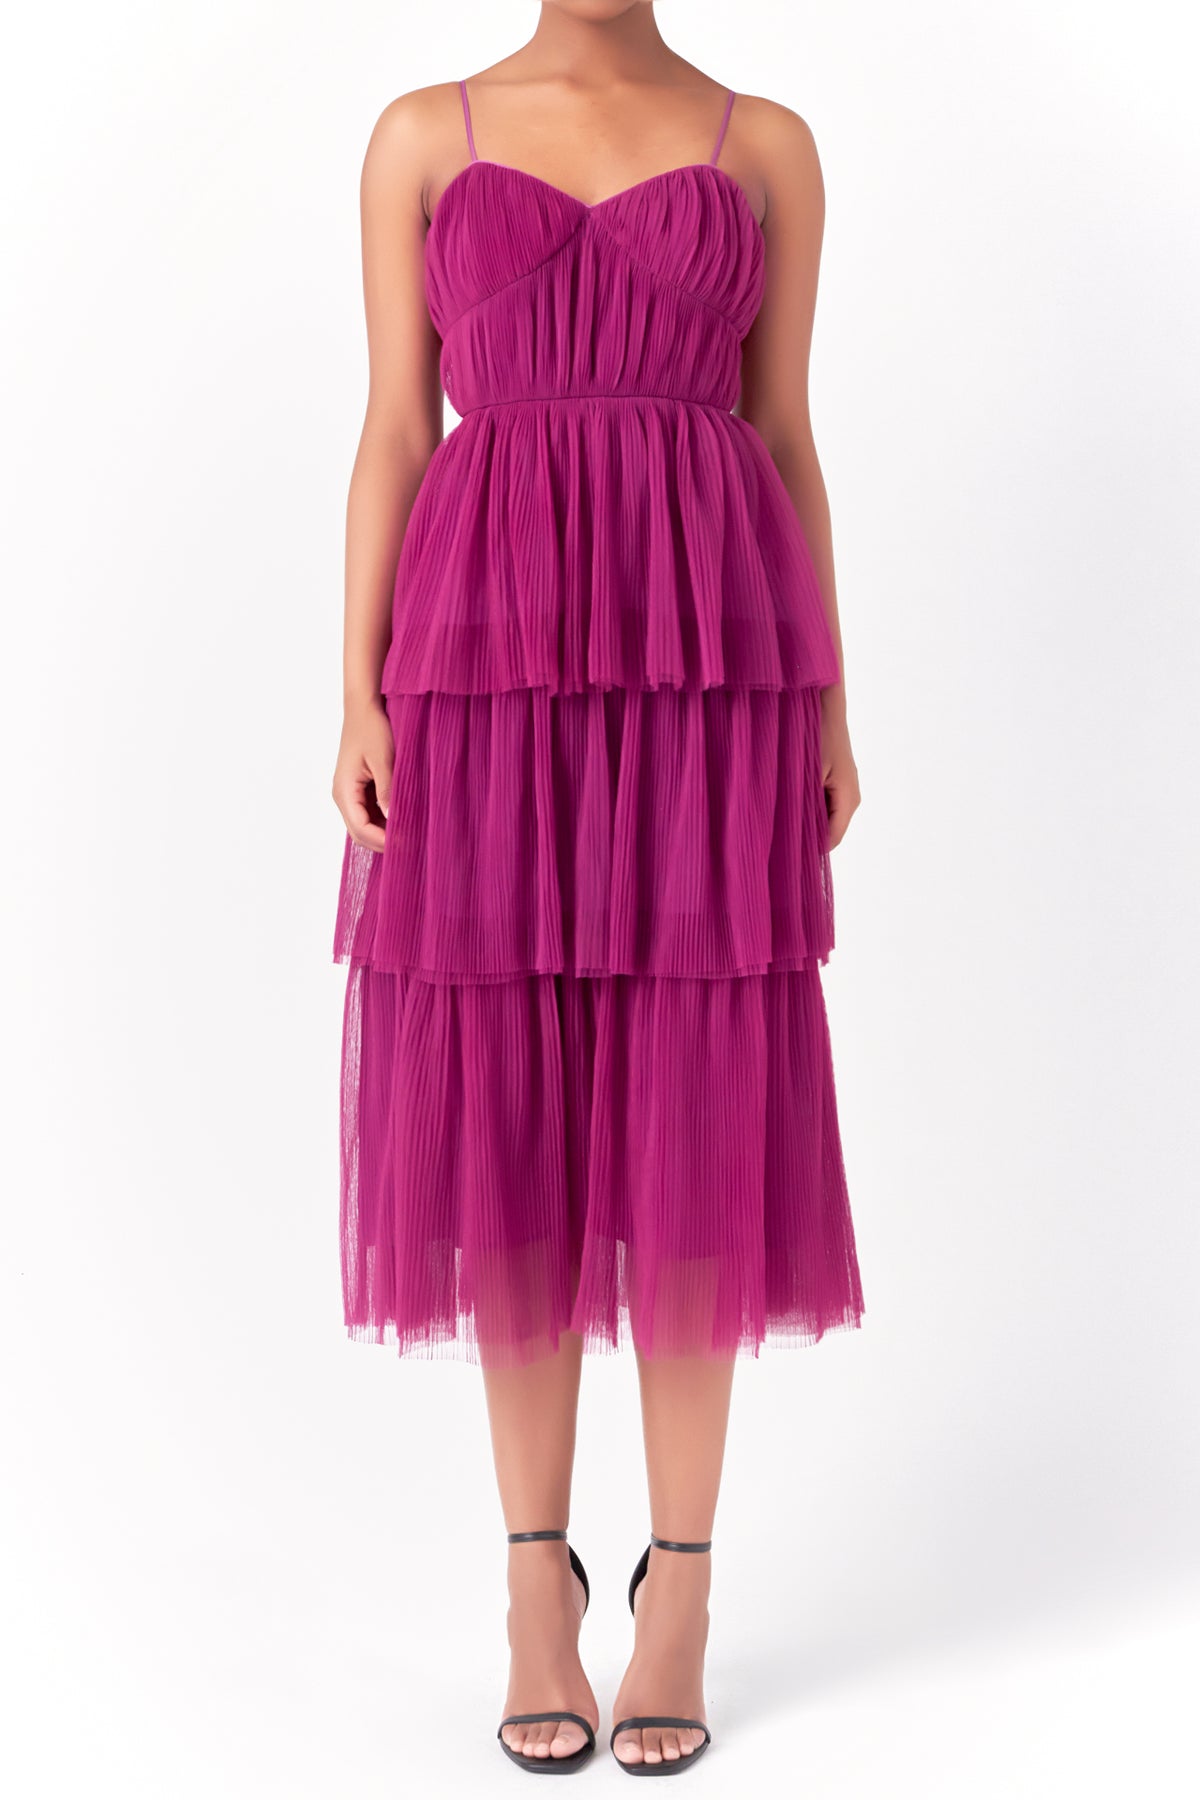 ENDLESS ROSE - Tulle Tiered Midi Dress - DRESSES available at Objectrare